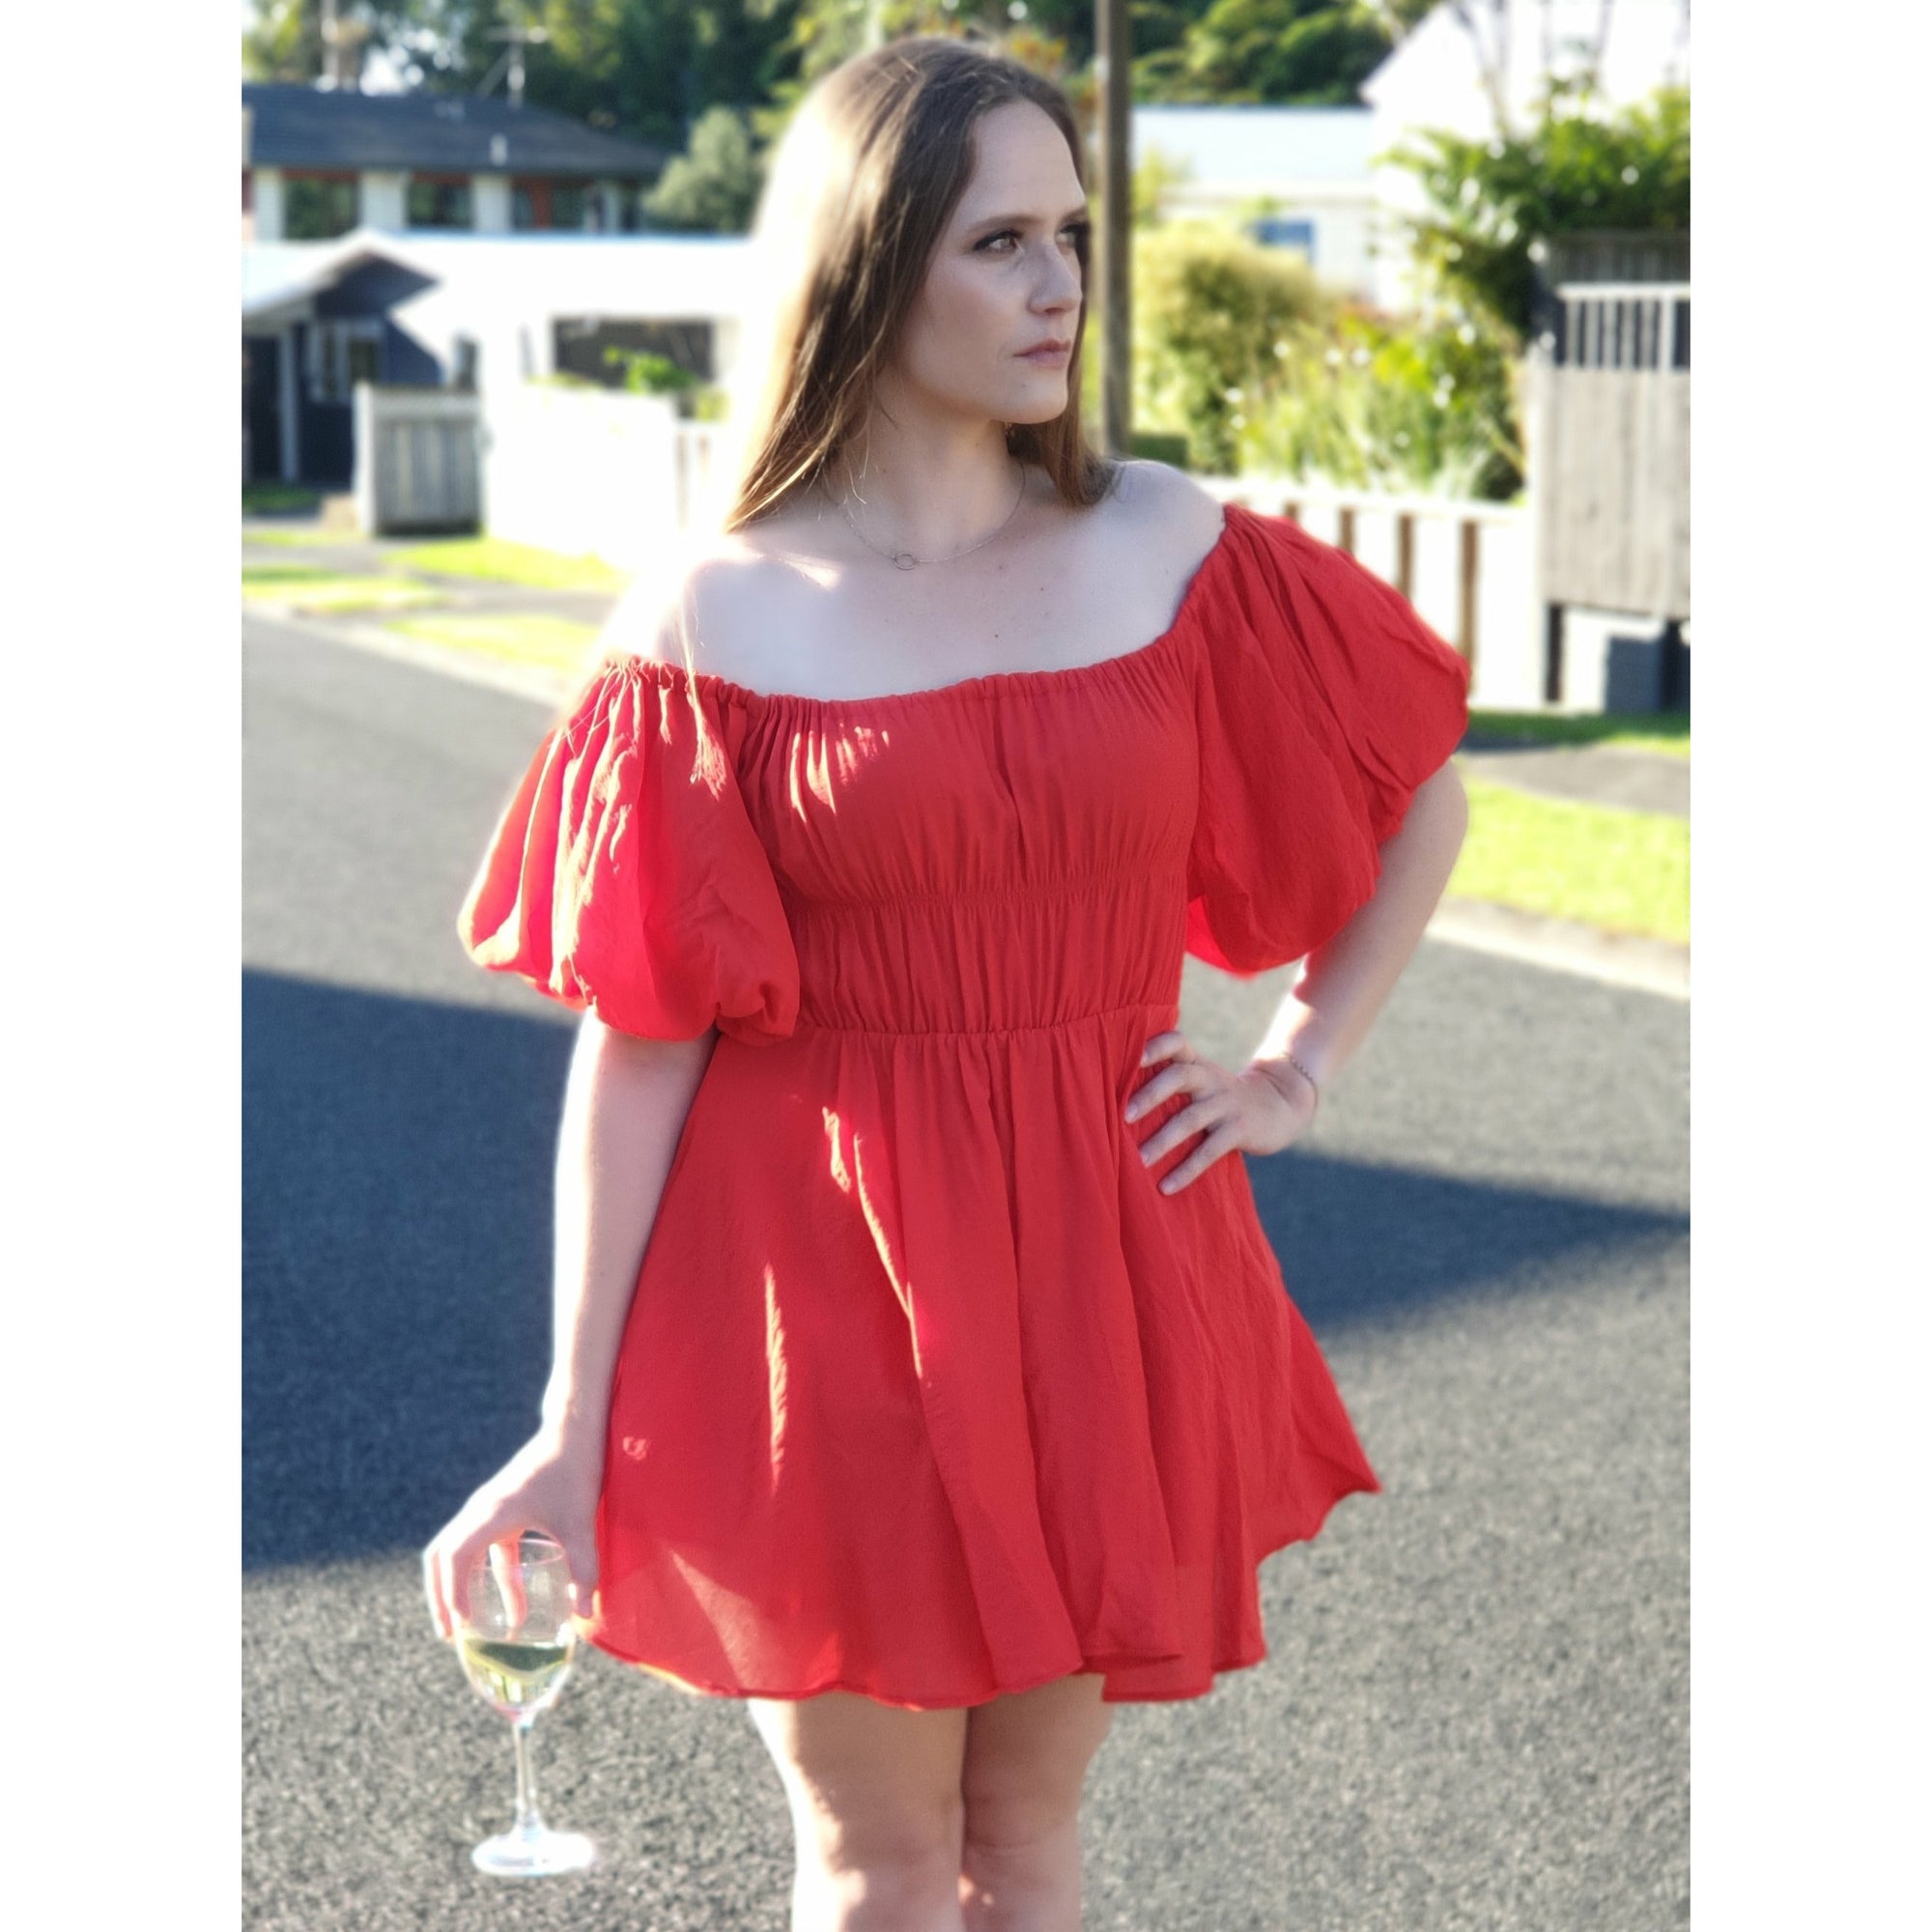 Rosalie baby doll dress - Red Not specified